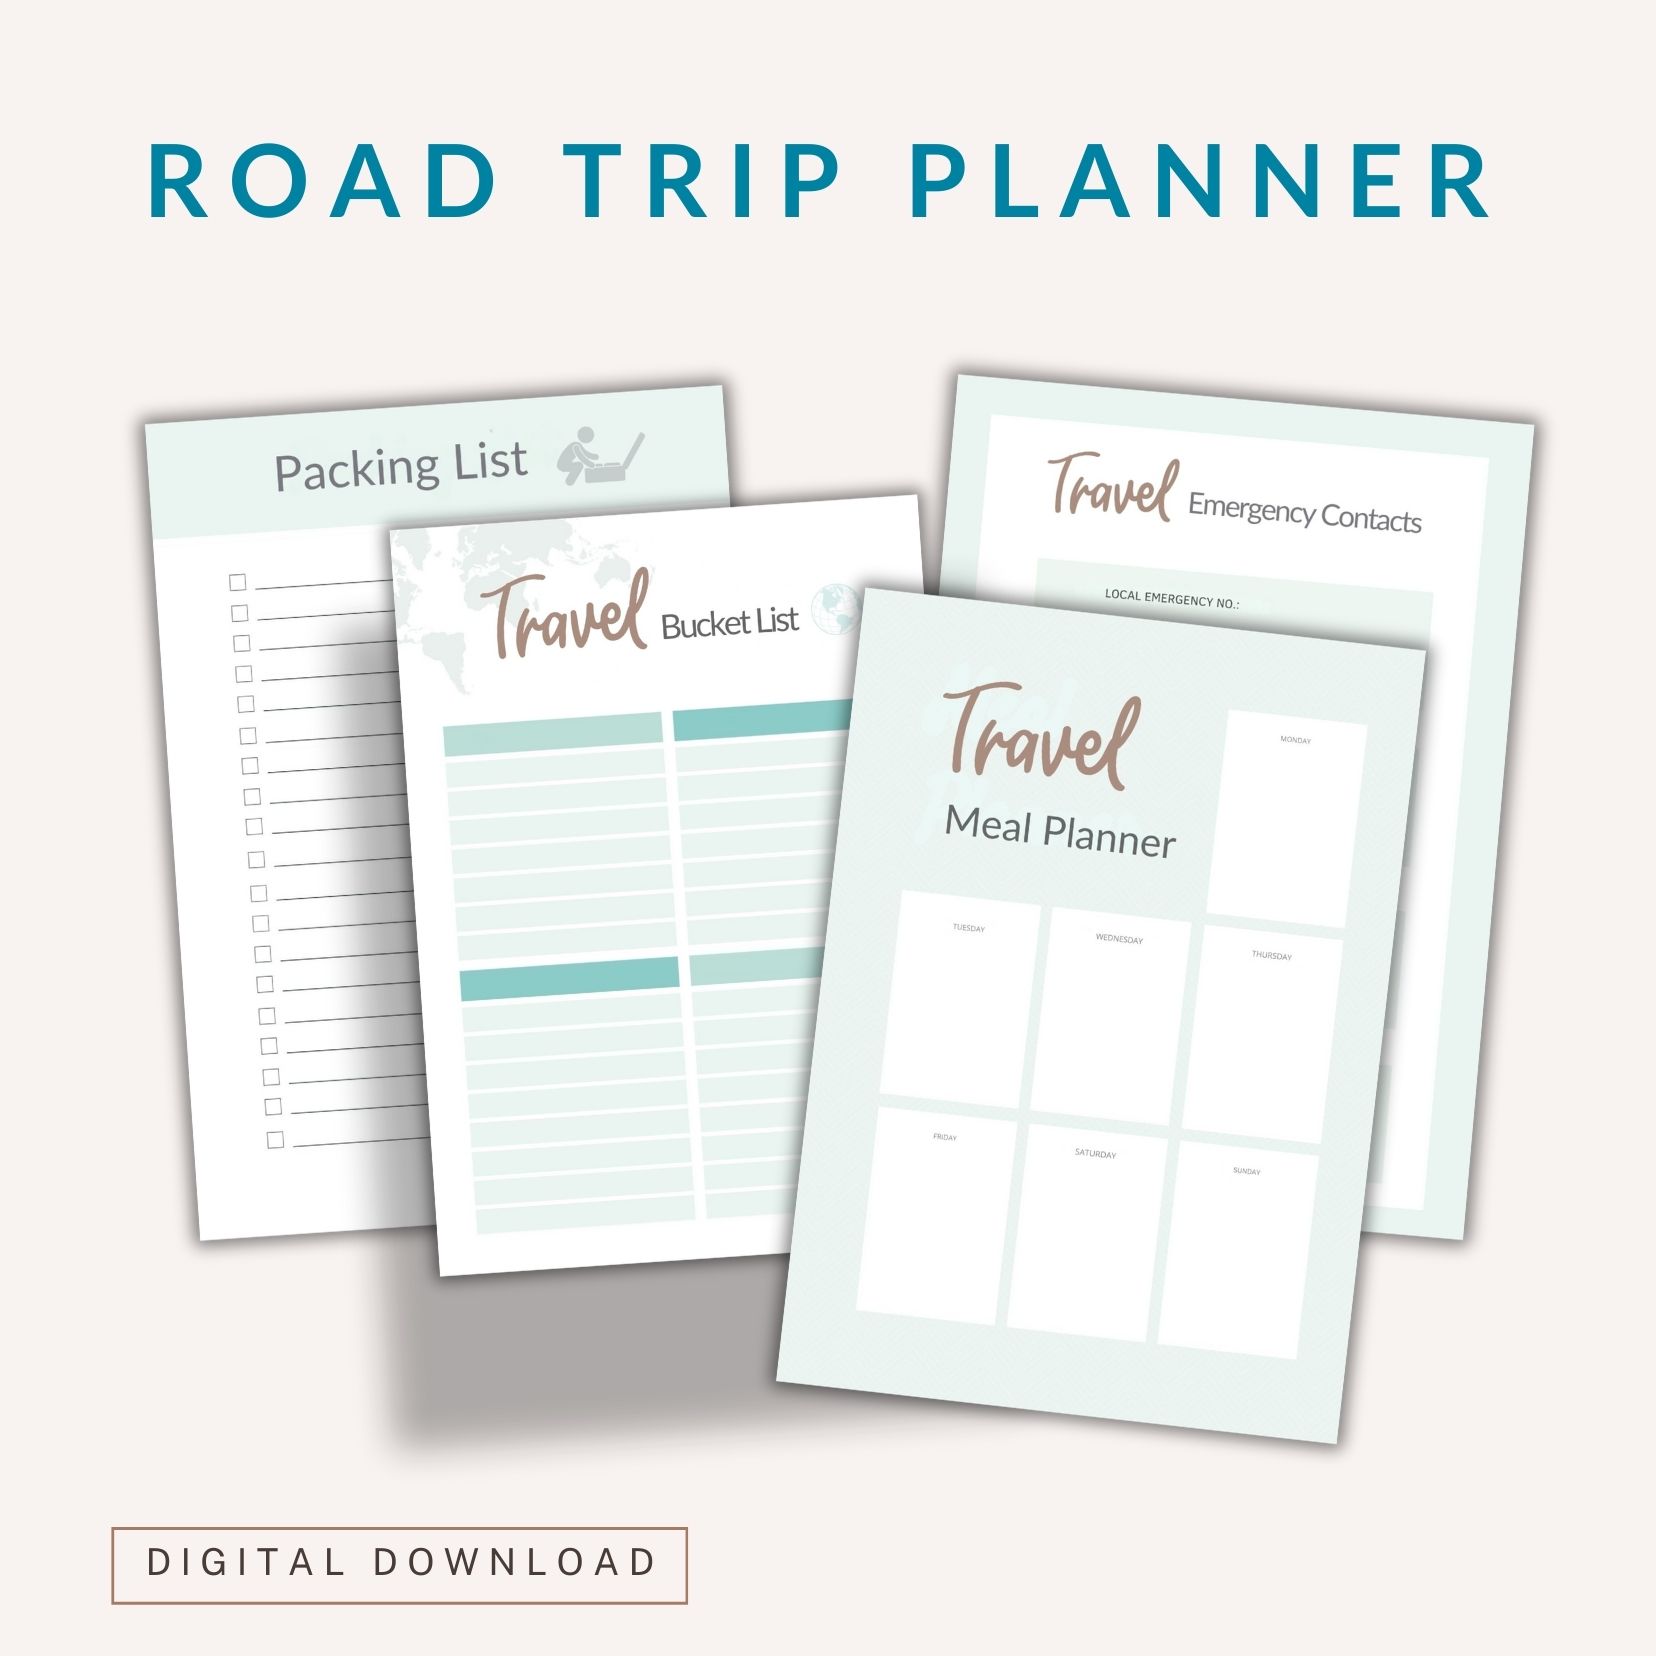 Road trip planner pages